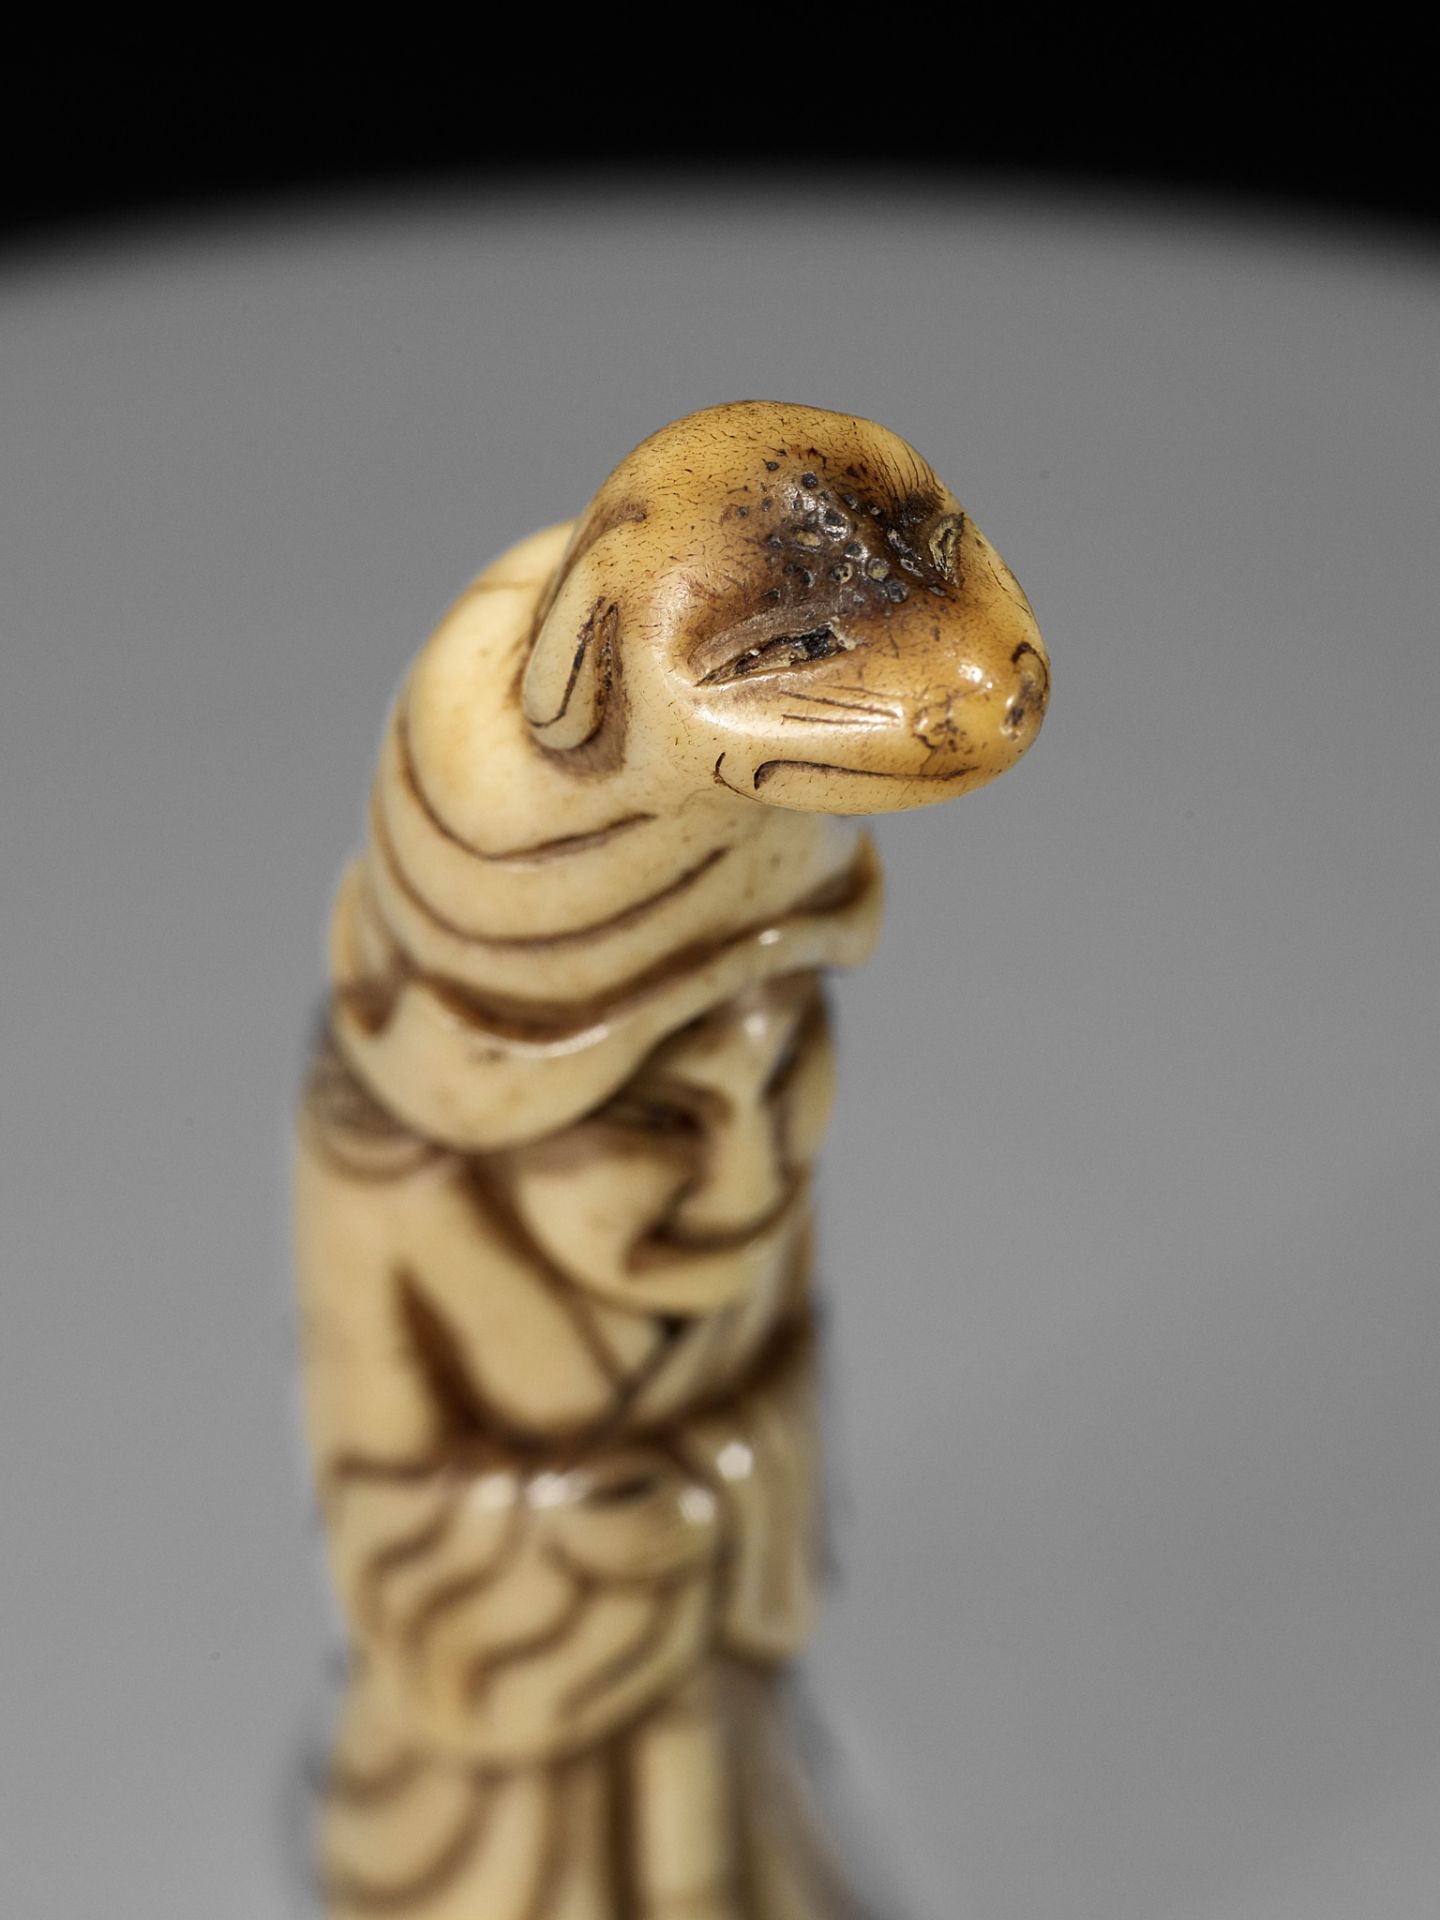 A RARE STAG ANTLER NETSUKE OF A PUPPETEER WITH A DOG PUPPET ON HIS HEAD